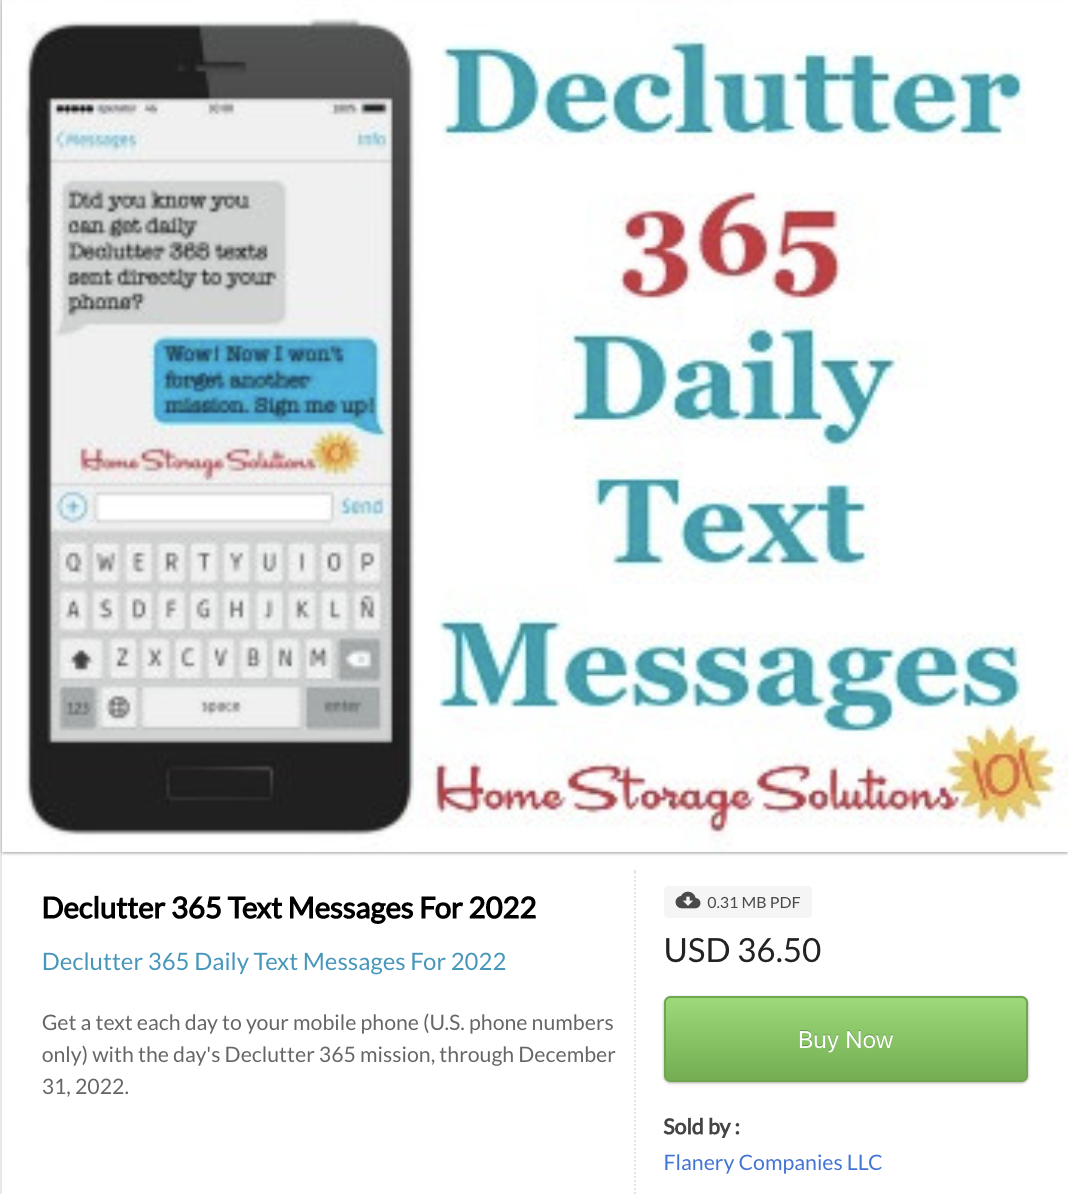 Click here to buy Declutter 365 daily text messages